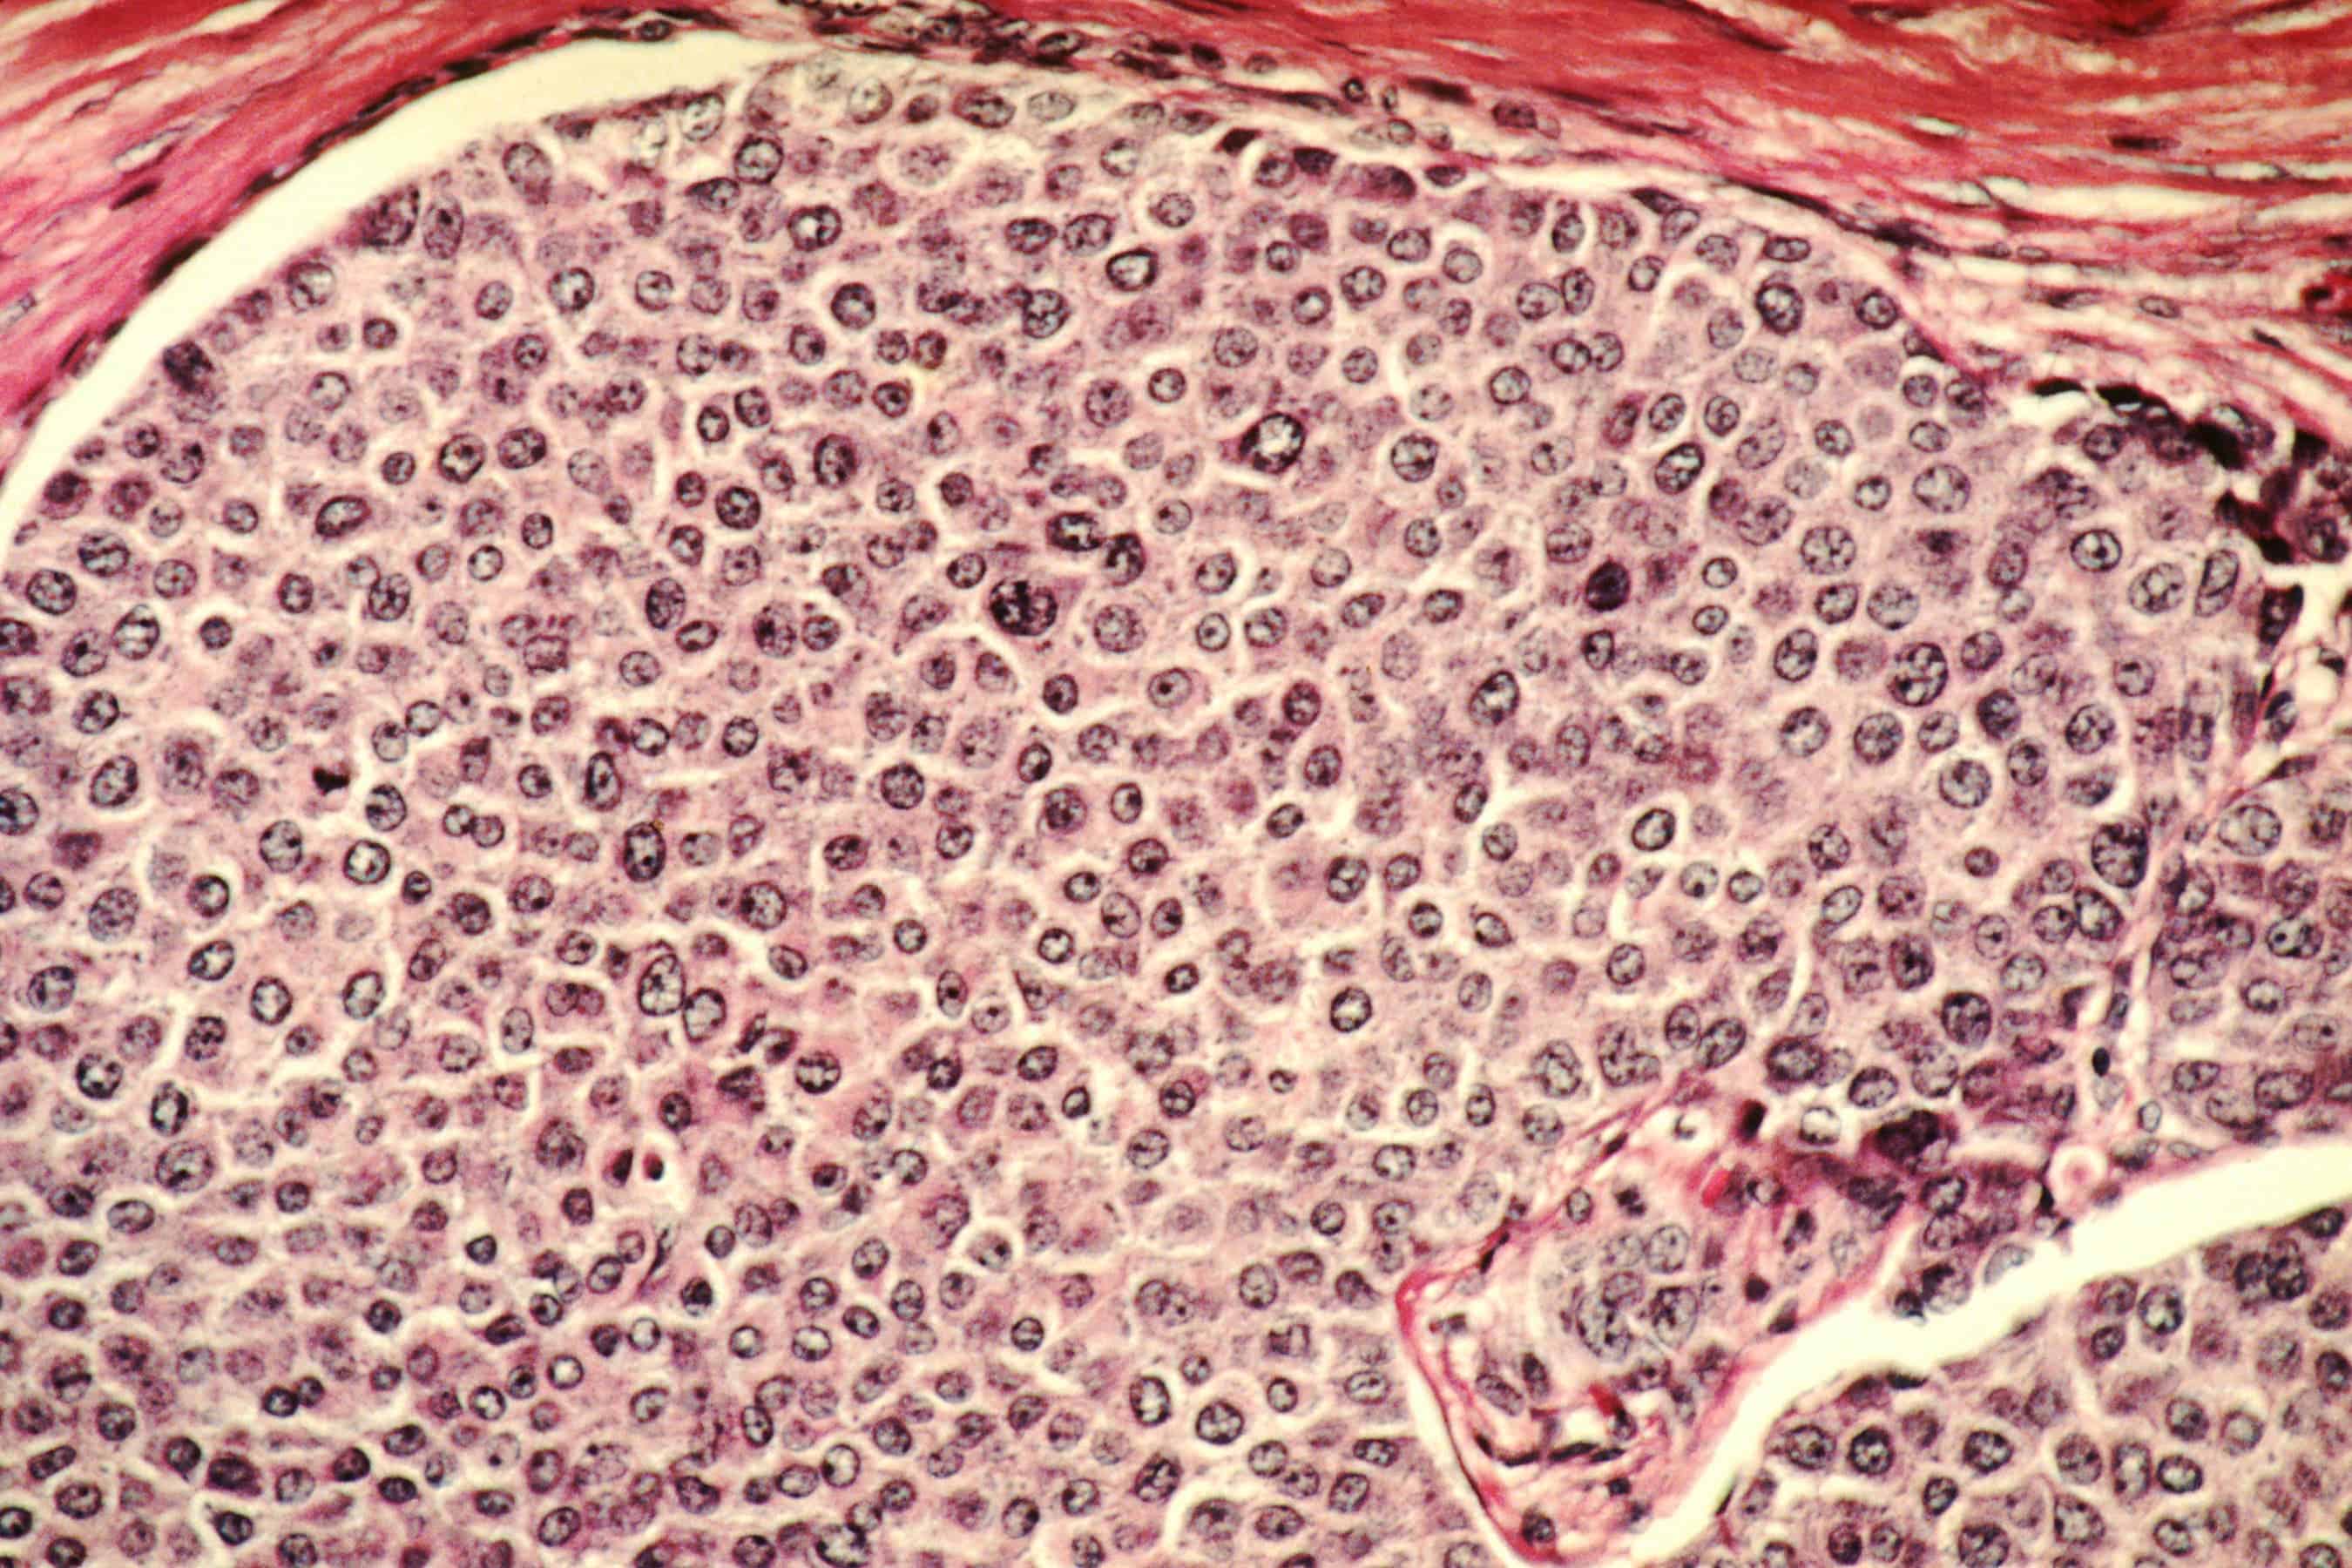 Breast cancer cells. Credit: Wikimedia Commons.